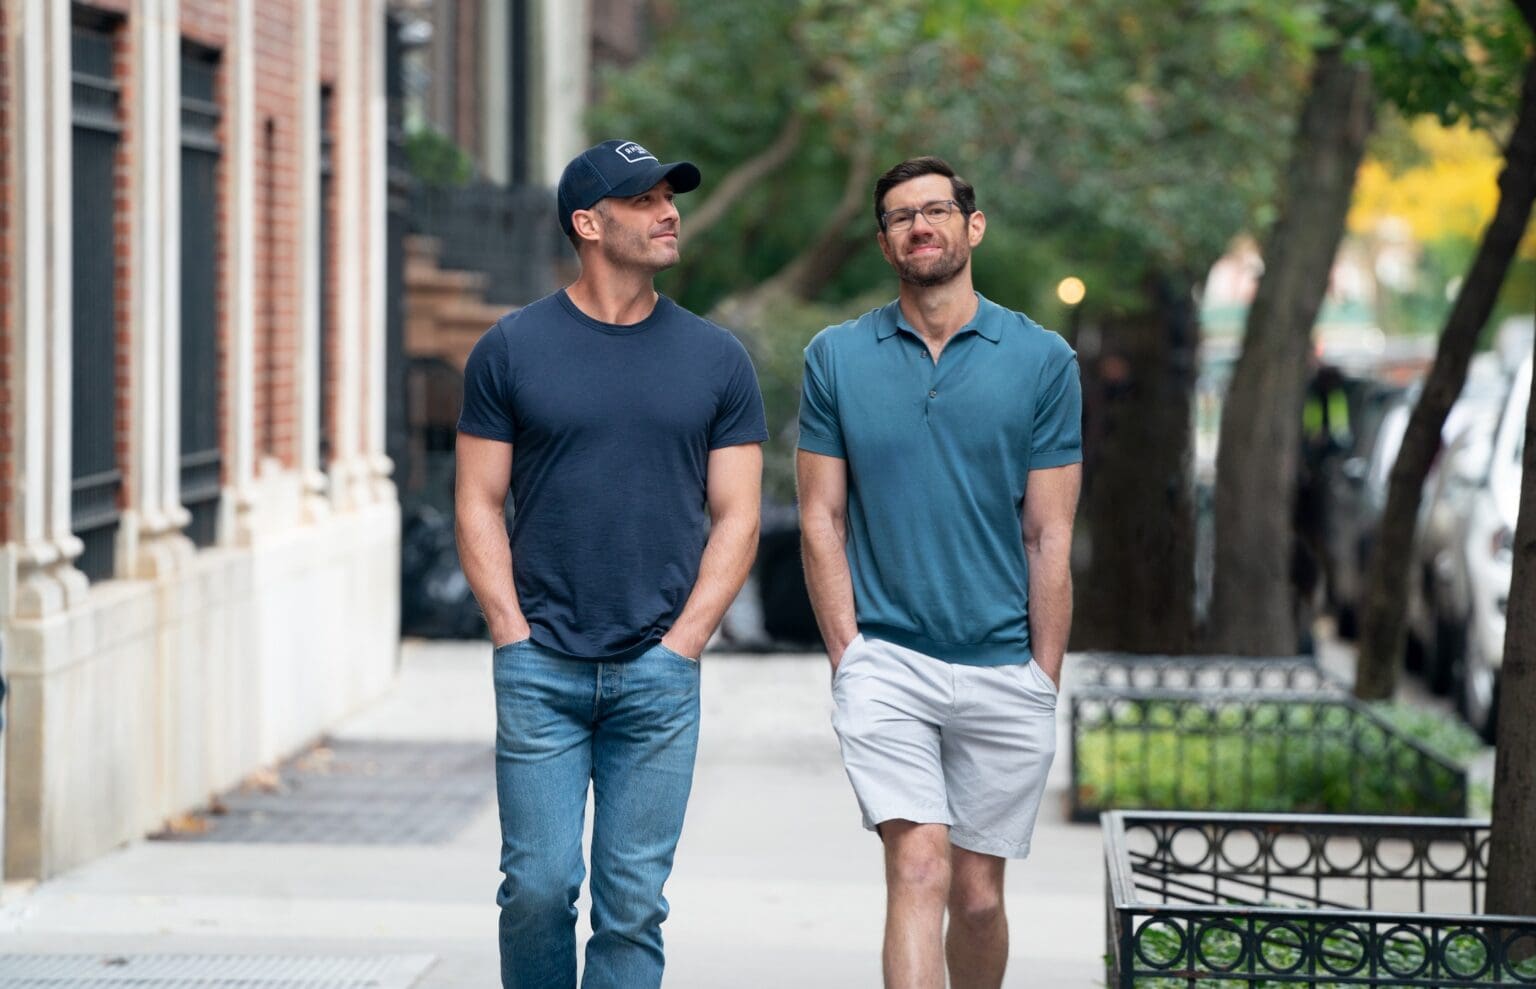 Aaron (Luke Macfarlane) and Bobby (Billy Eichner) in Bros, co-written, produced and directed by Nicholas Stoller. (Photo Credit: Nicole Rivelli/Universal Pictures)